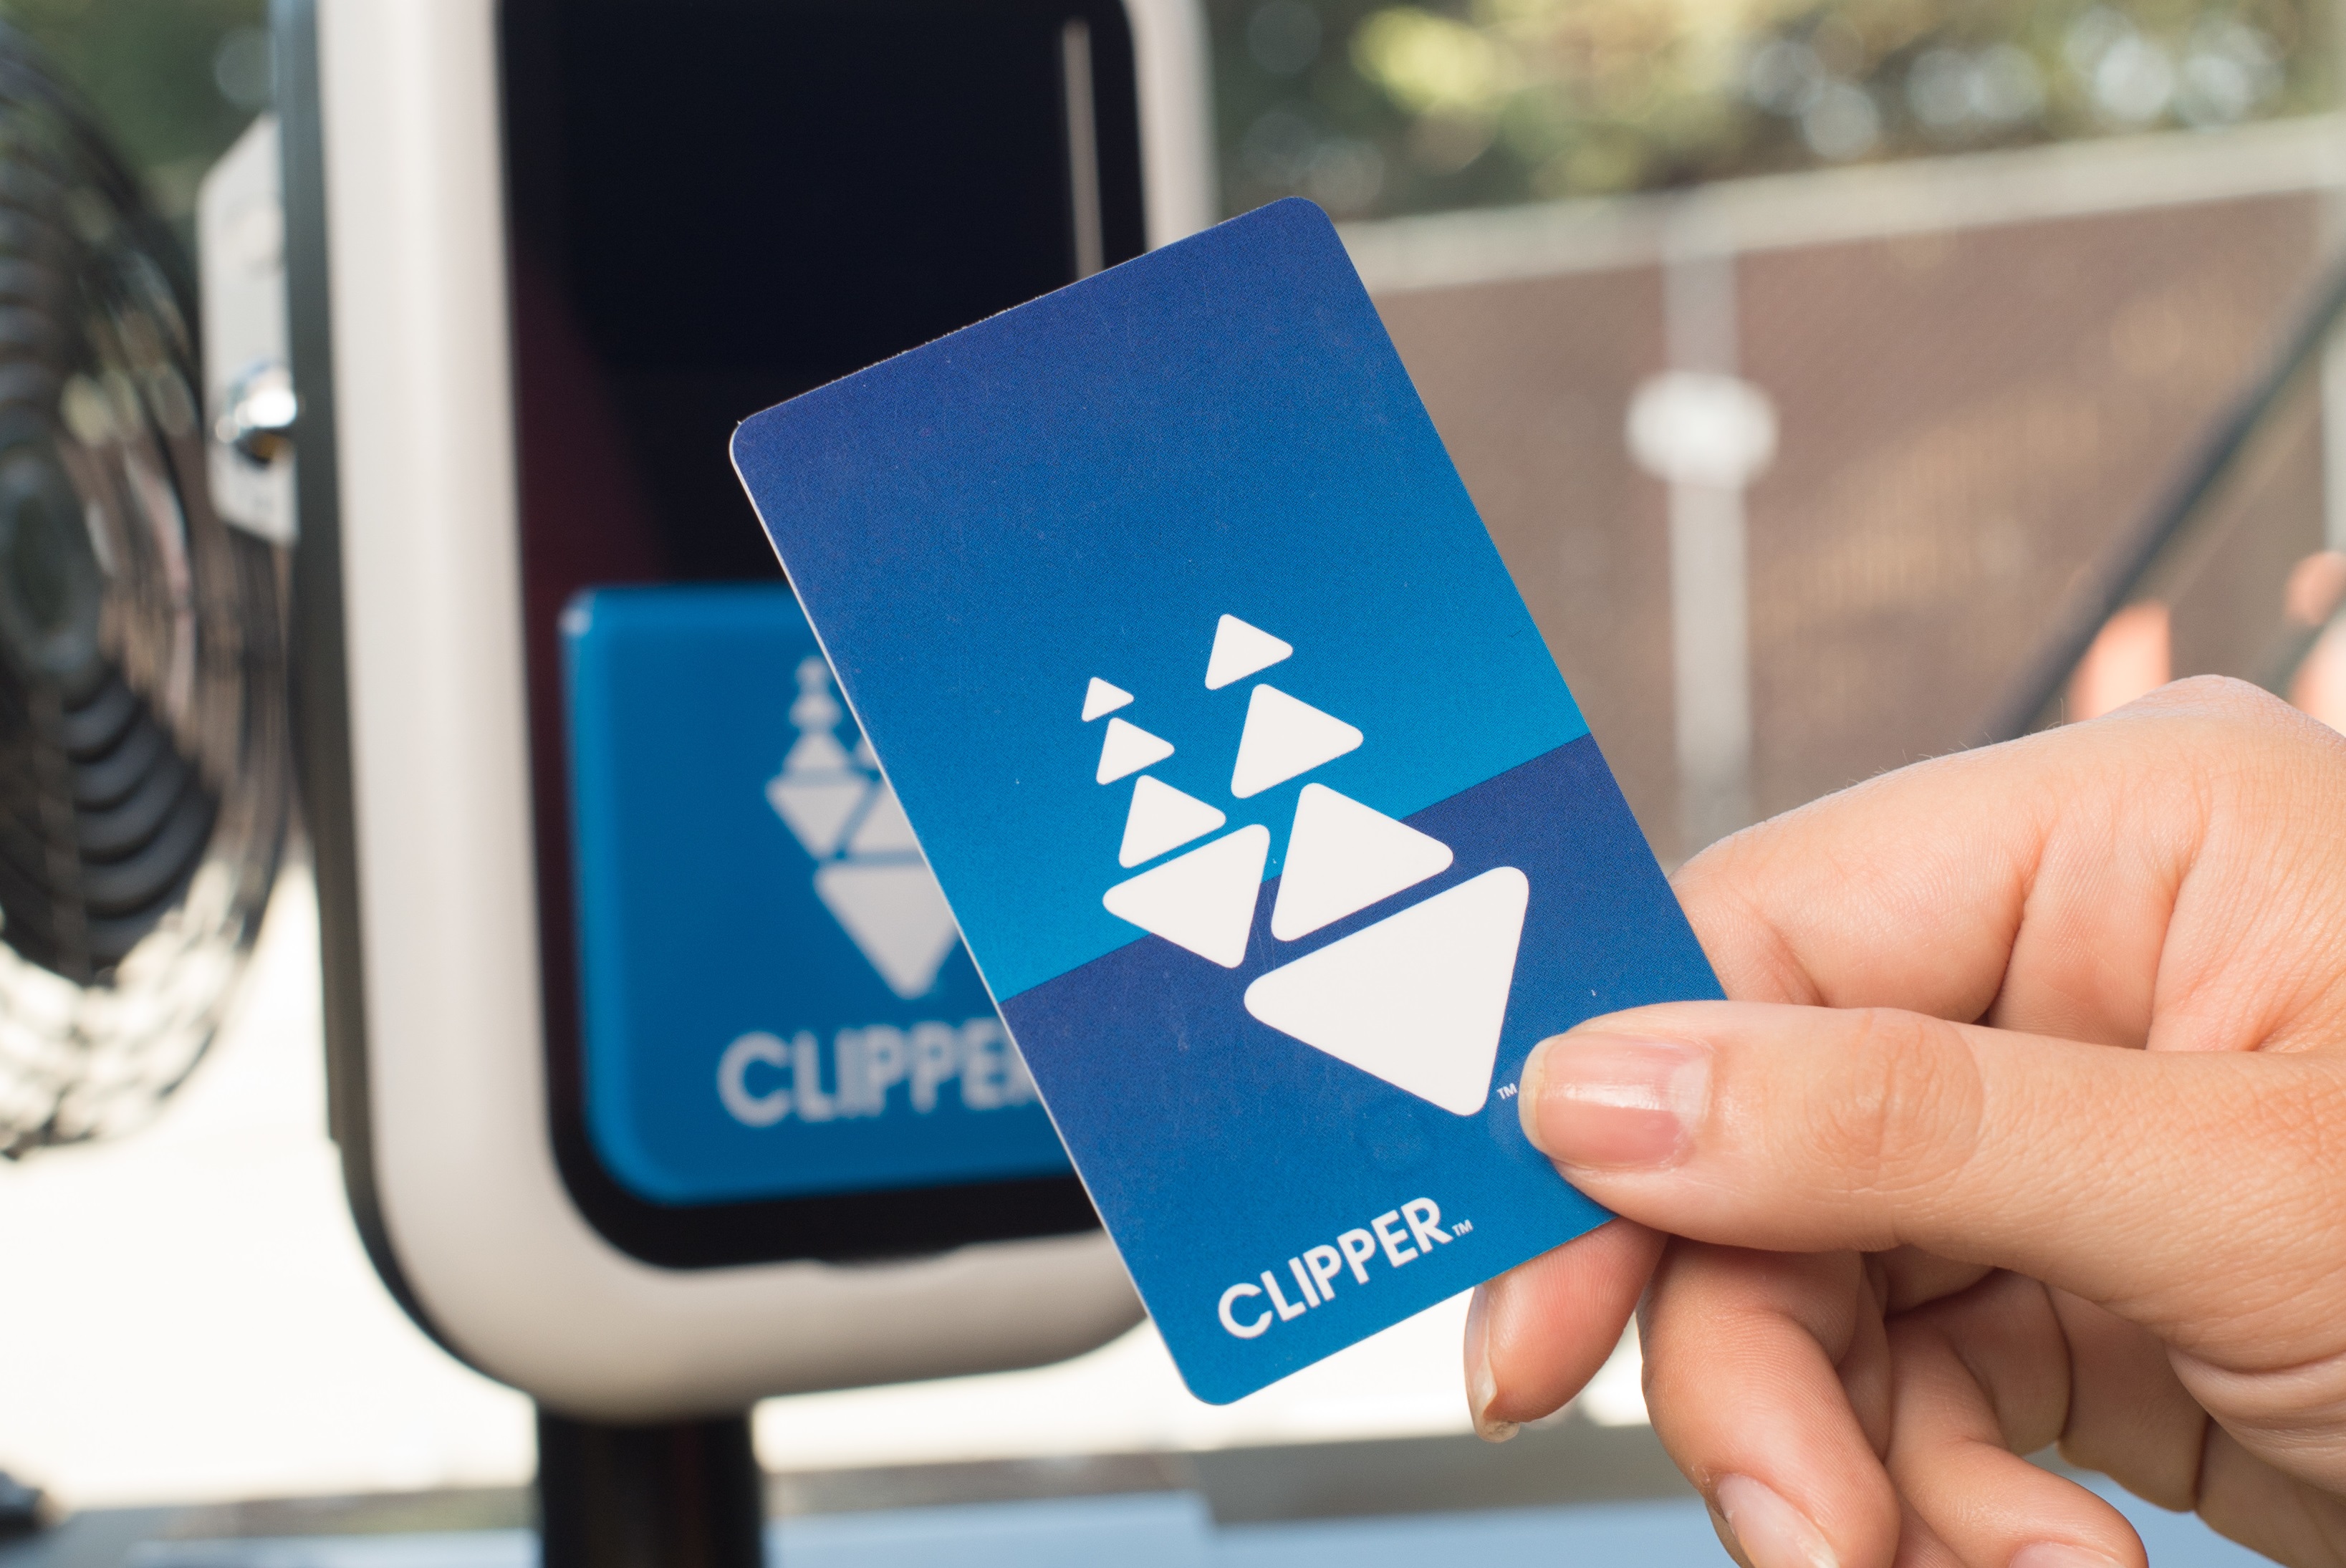 Close-up of a woman’s hand holding a Clipper card over a card reader inside a bus